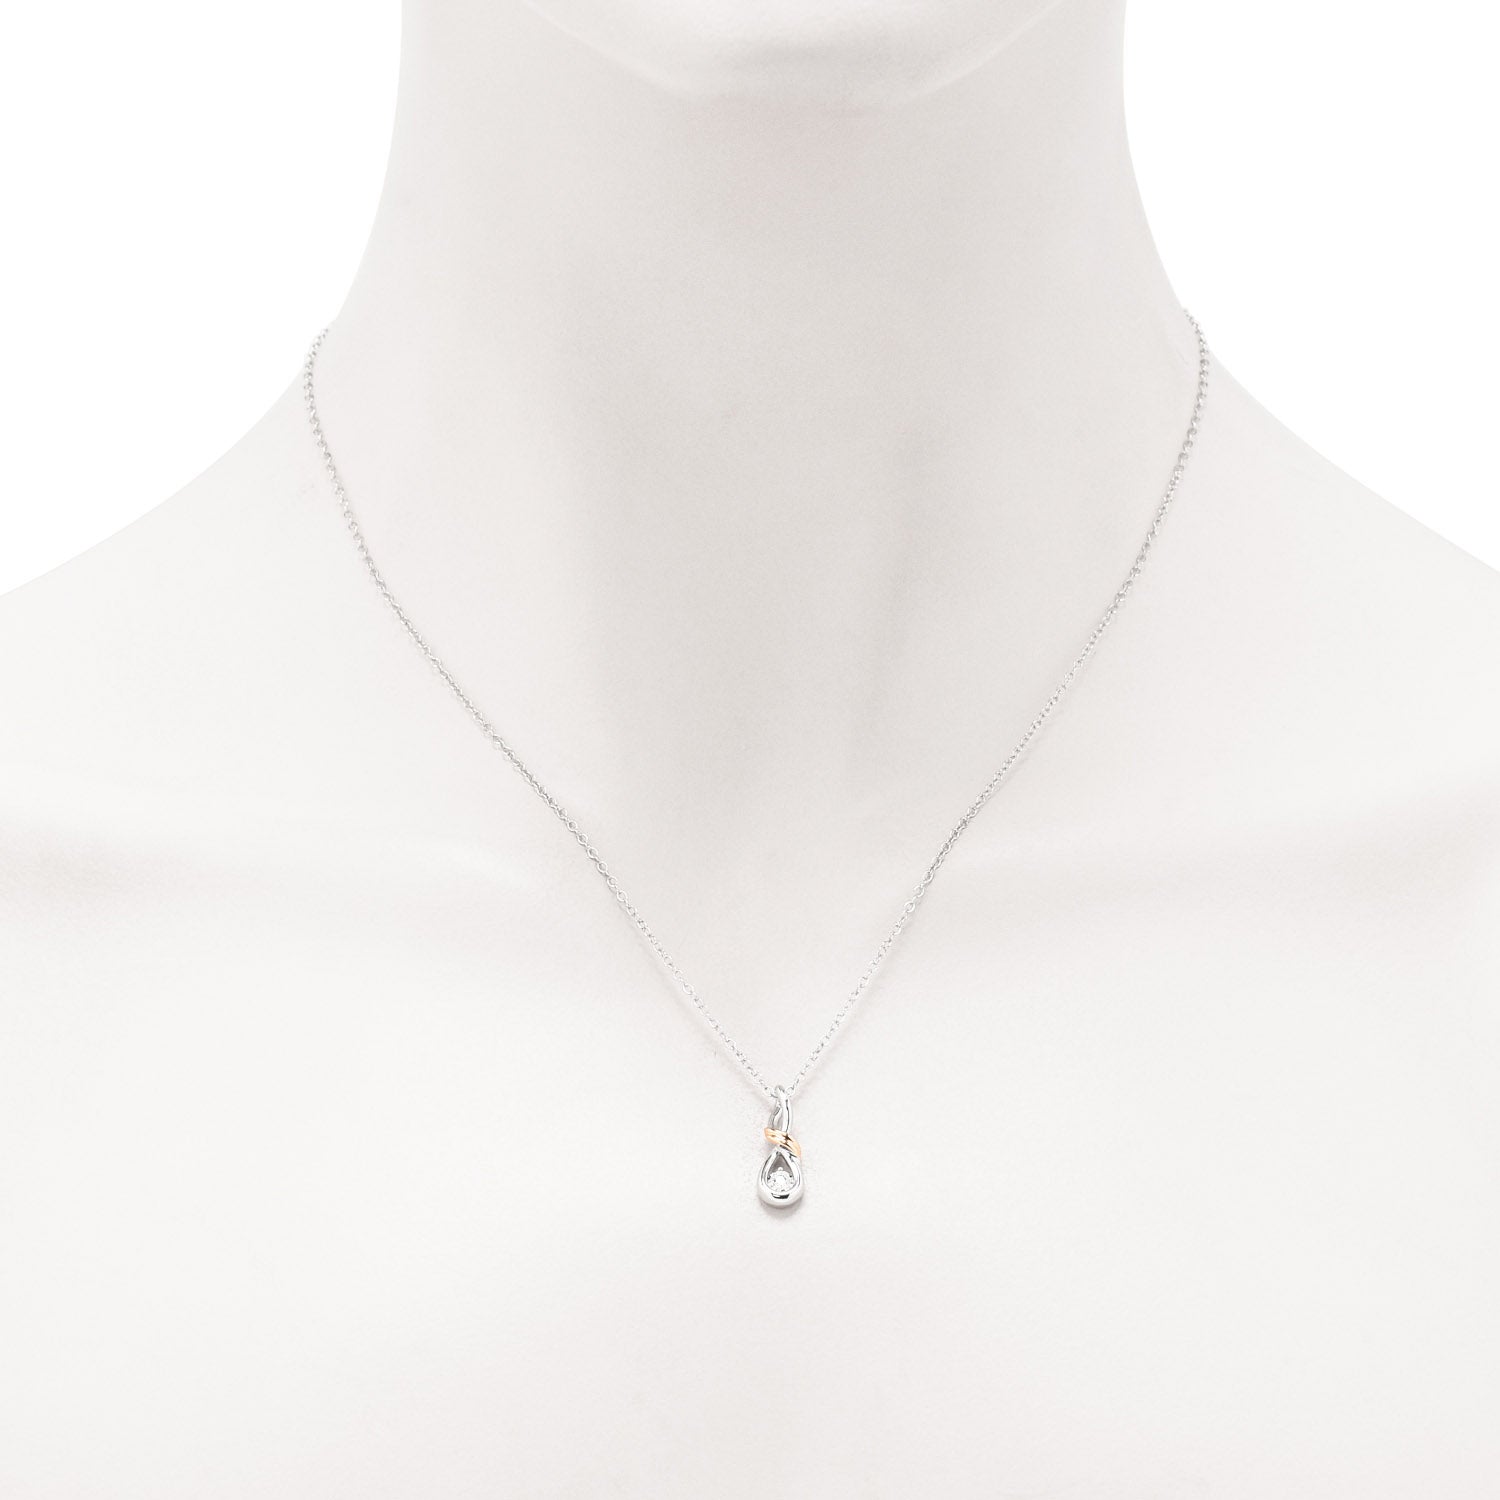 Northern Star Diamond Love Knot Collection Necklace in Sterling Silver and 10kt Rose Gold (.04ct)